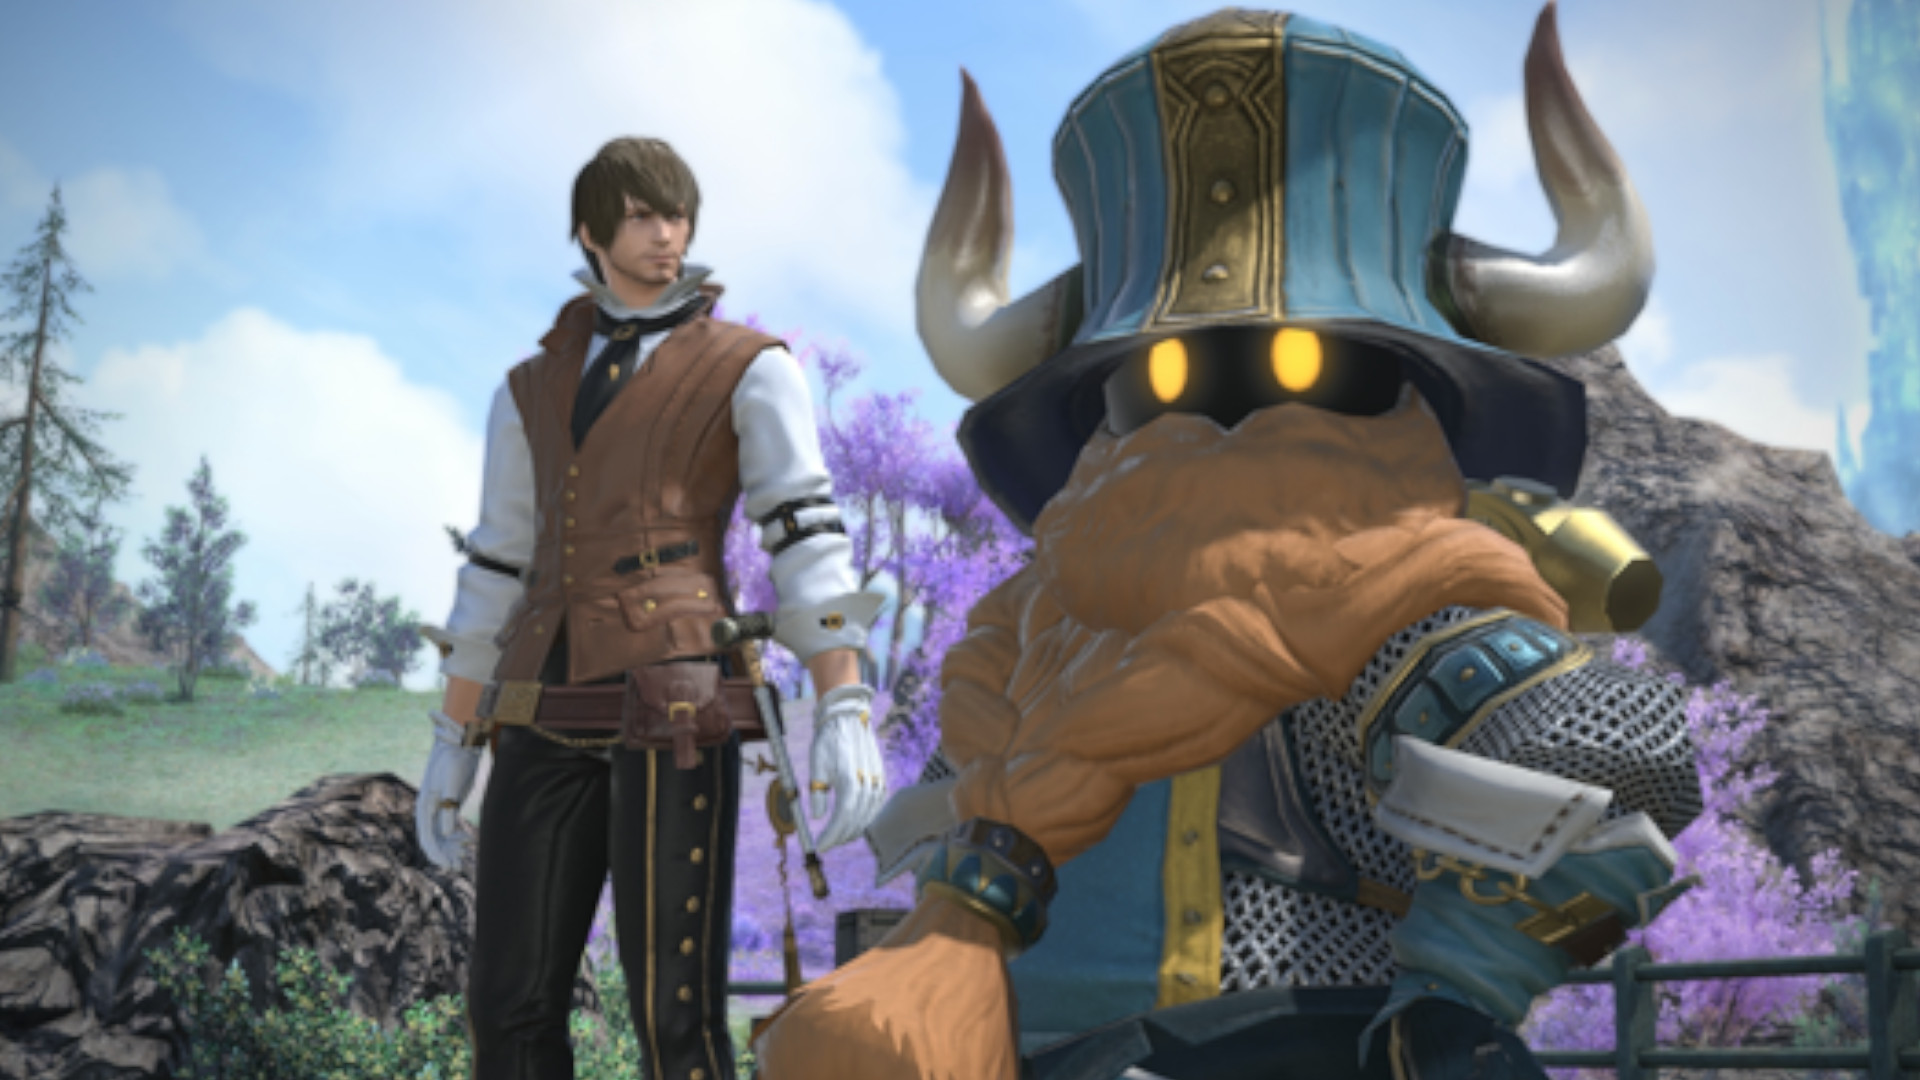 Final Fantasy XIV patch 5.3 release time here's when maintenance ends in your time zone | PCGamesN